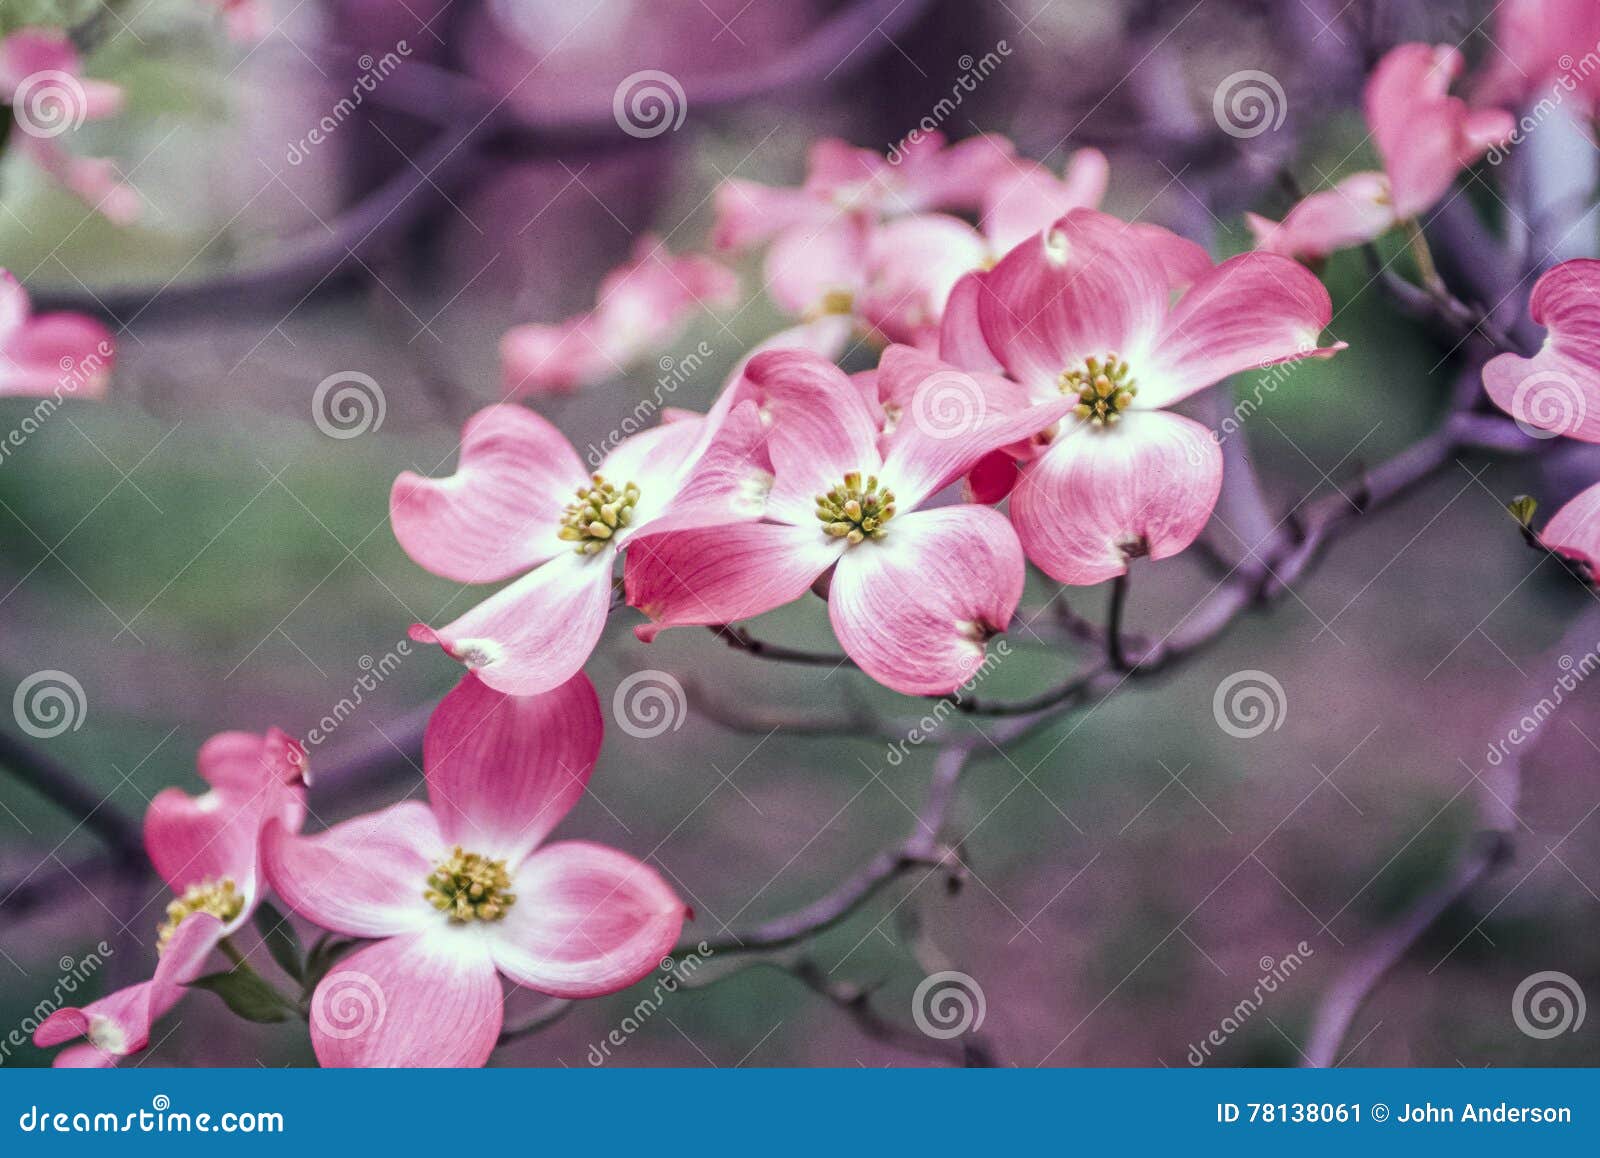 Dogwood Tree In Spring Stock Image Image Of Flower Spring 78138061